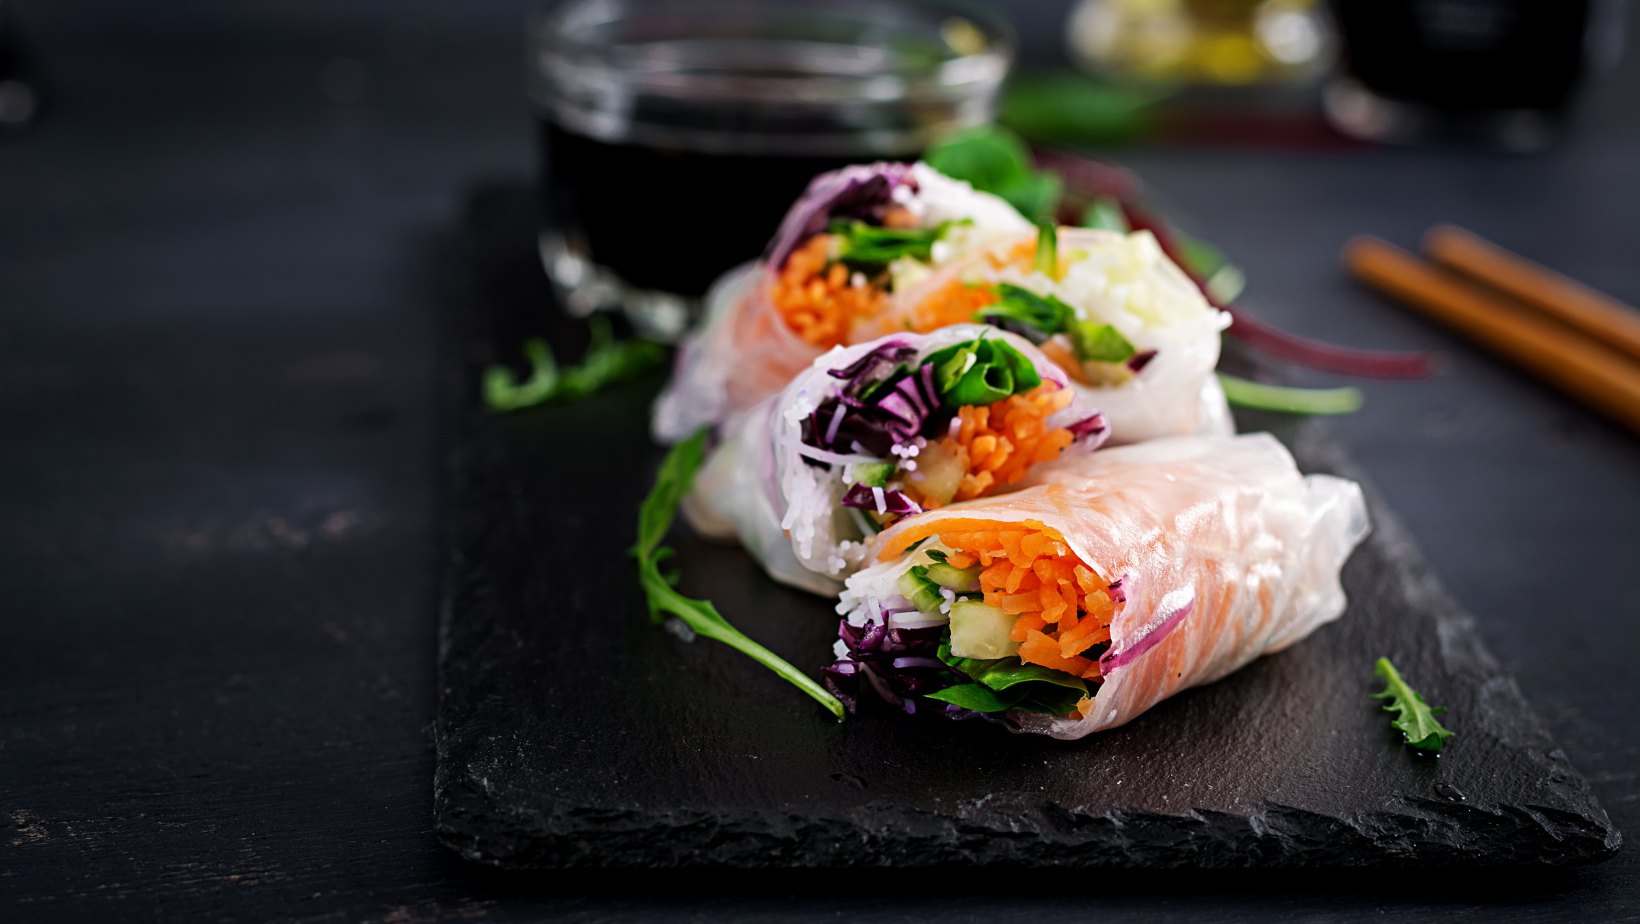 Vegetarian vietnamese spring rolls with spicy sauce, carrot, cucumber, red cabbage and rice noodle. Vegan food. Tasty meal.